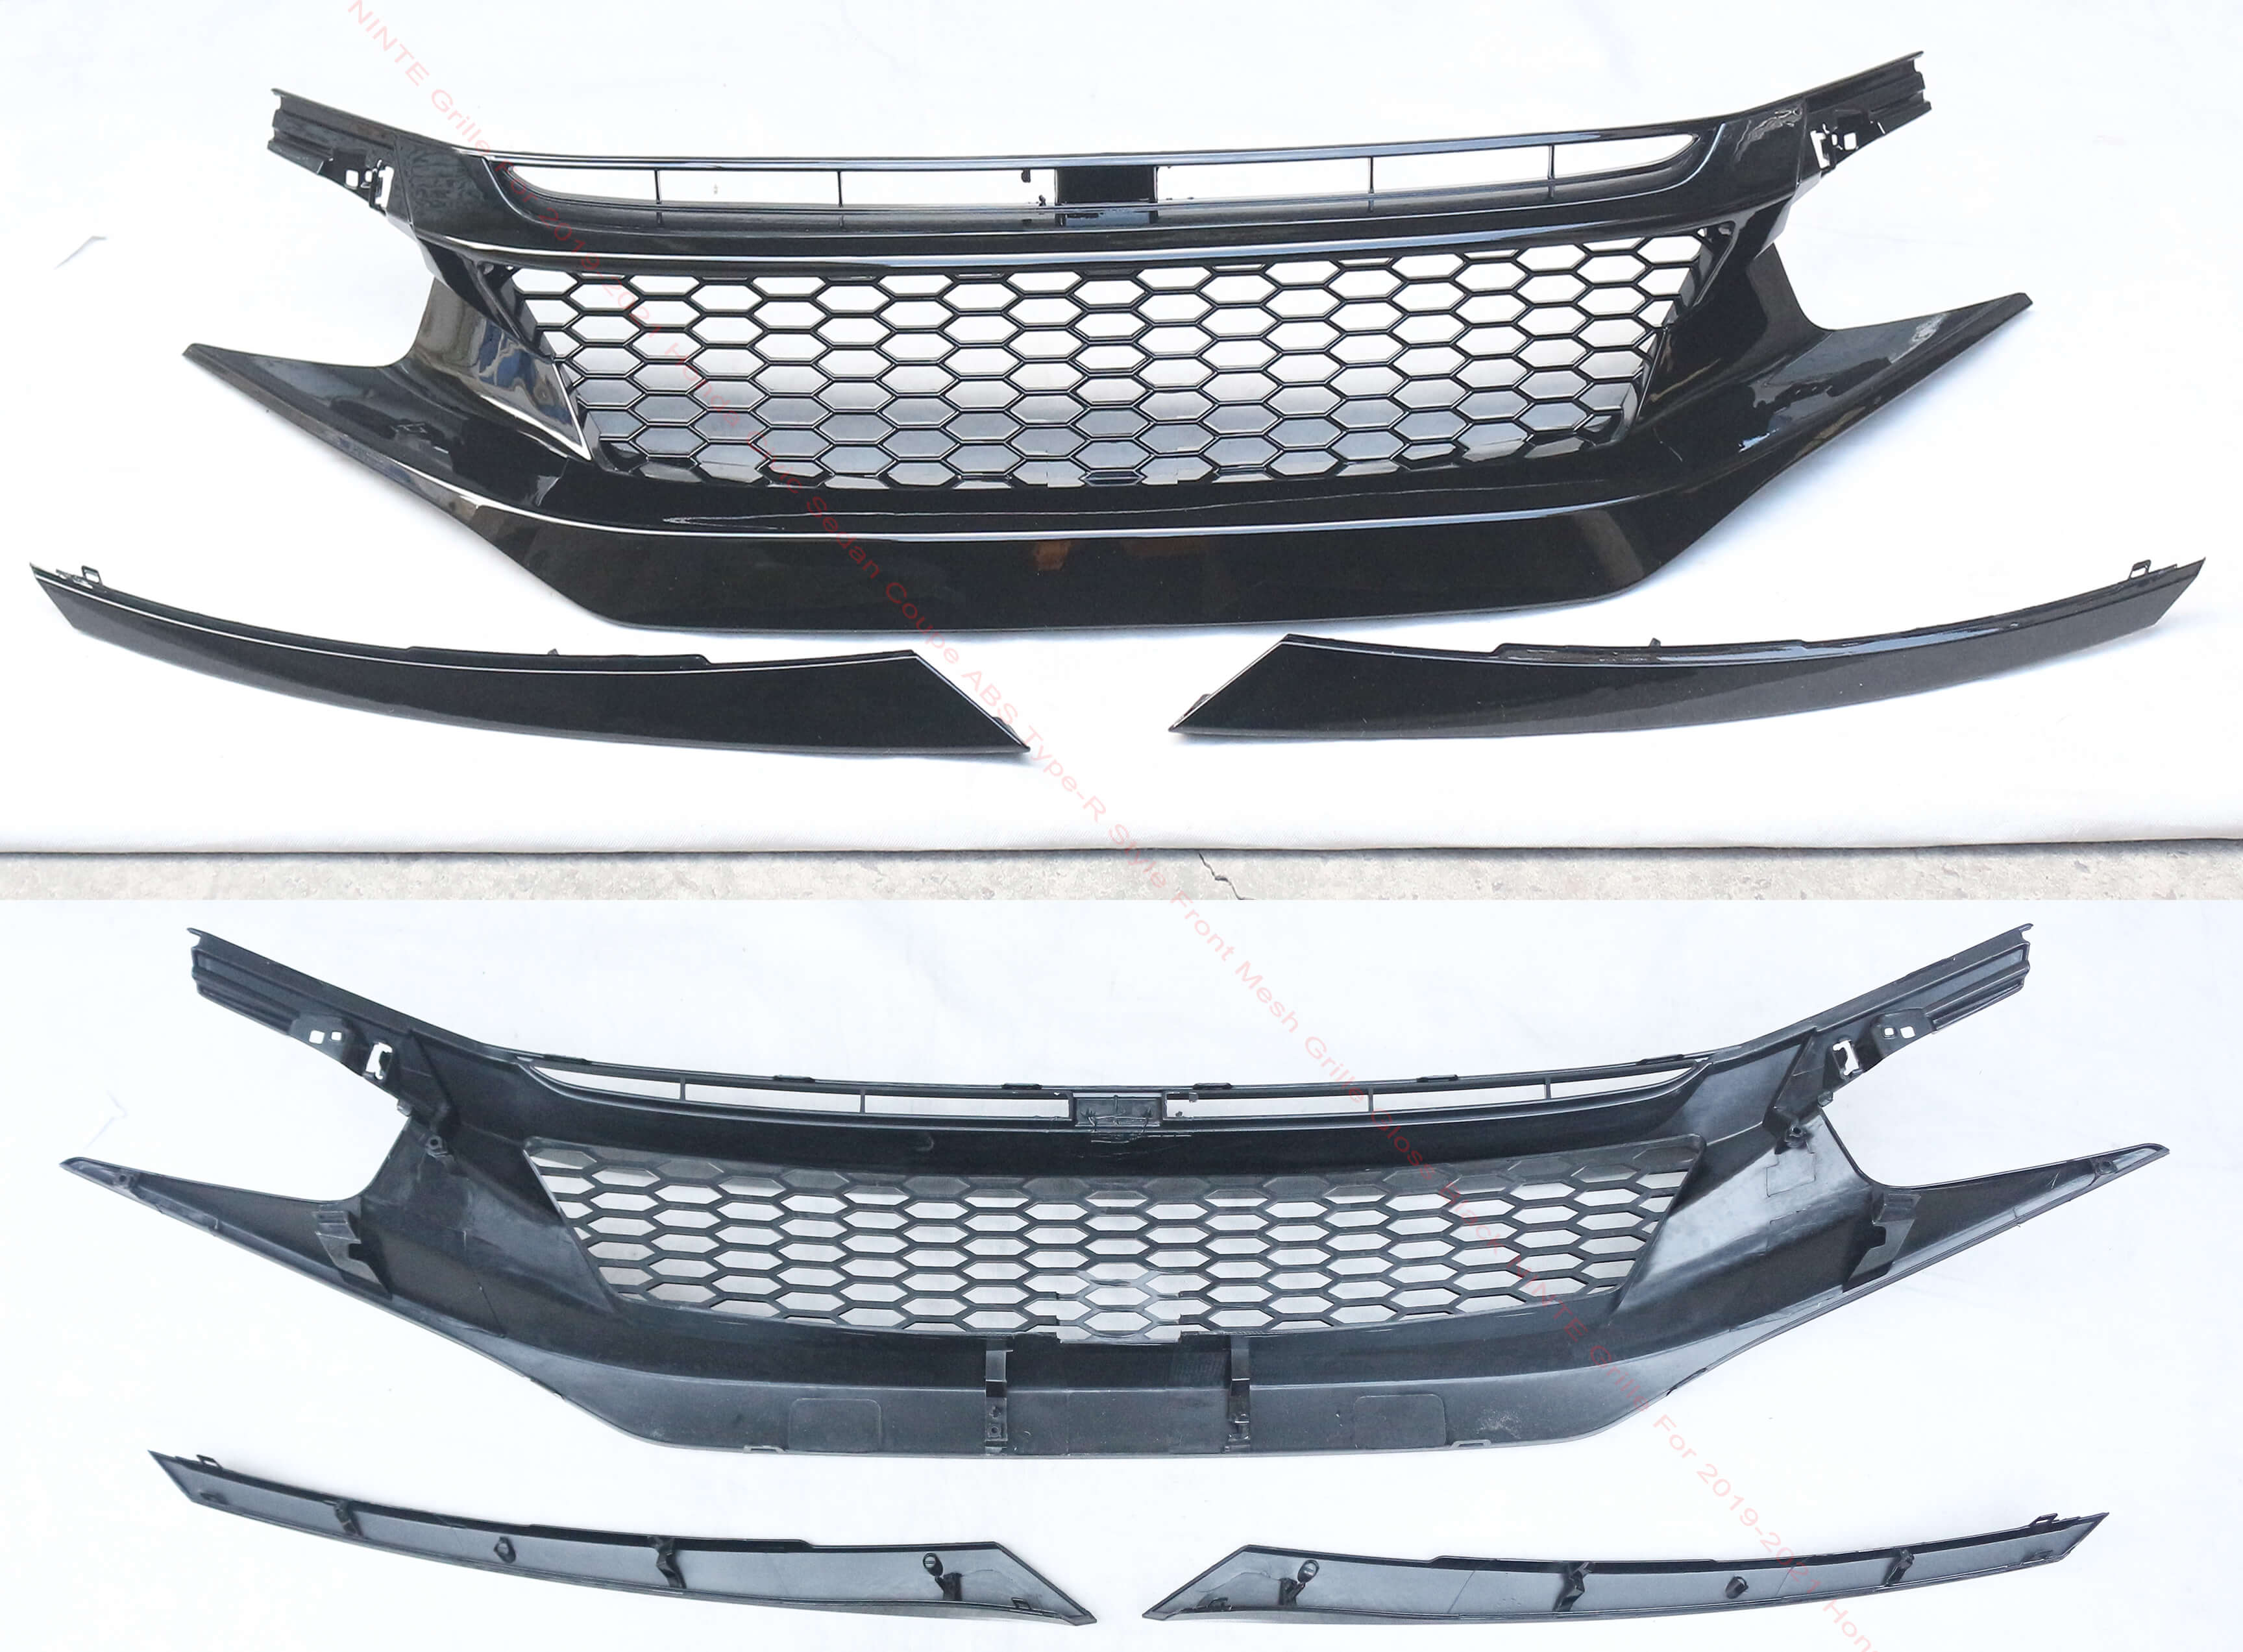 NINTE Grille For 2019-2021 Honda Civic Sedan Coupe ABS